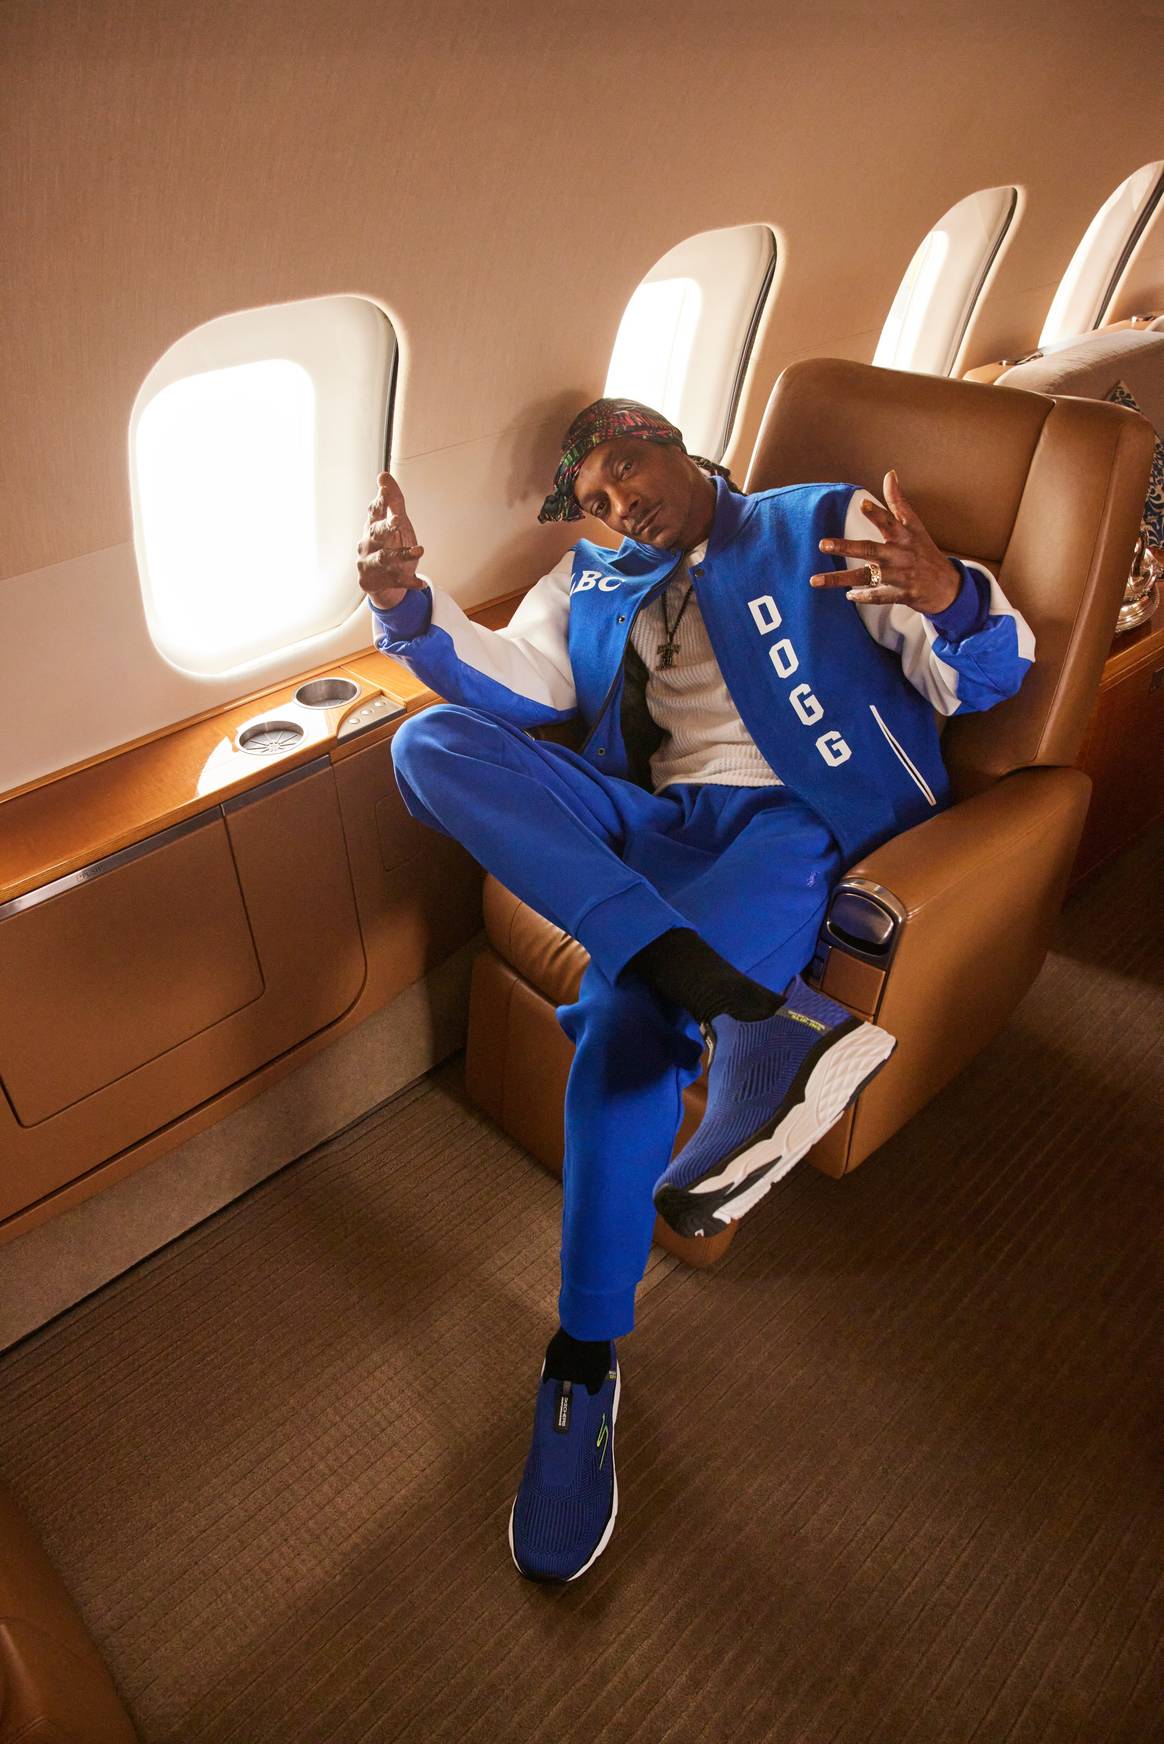 Snoop Dogg wearing Skechers Hands Free Slip-ins in Super Bowl commercial.